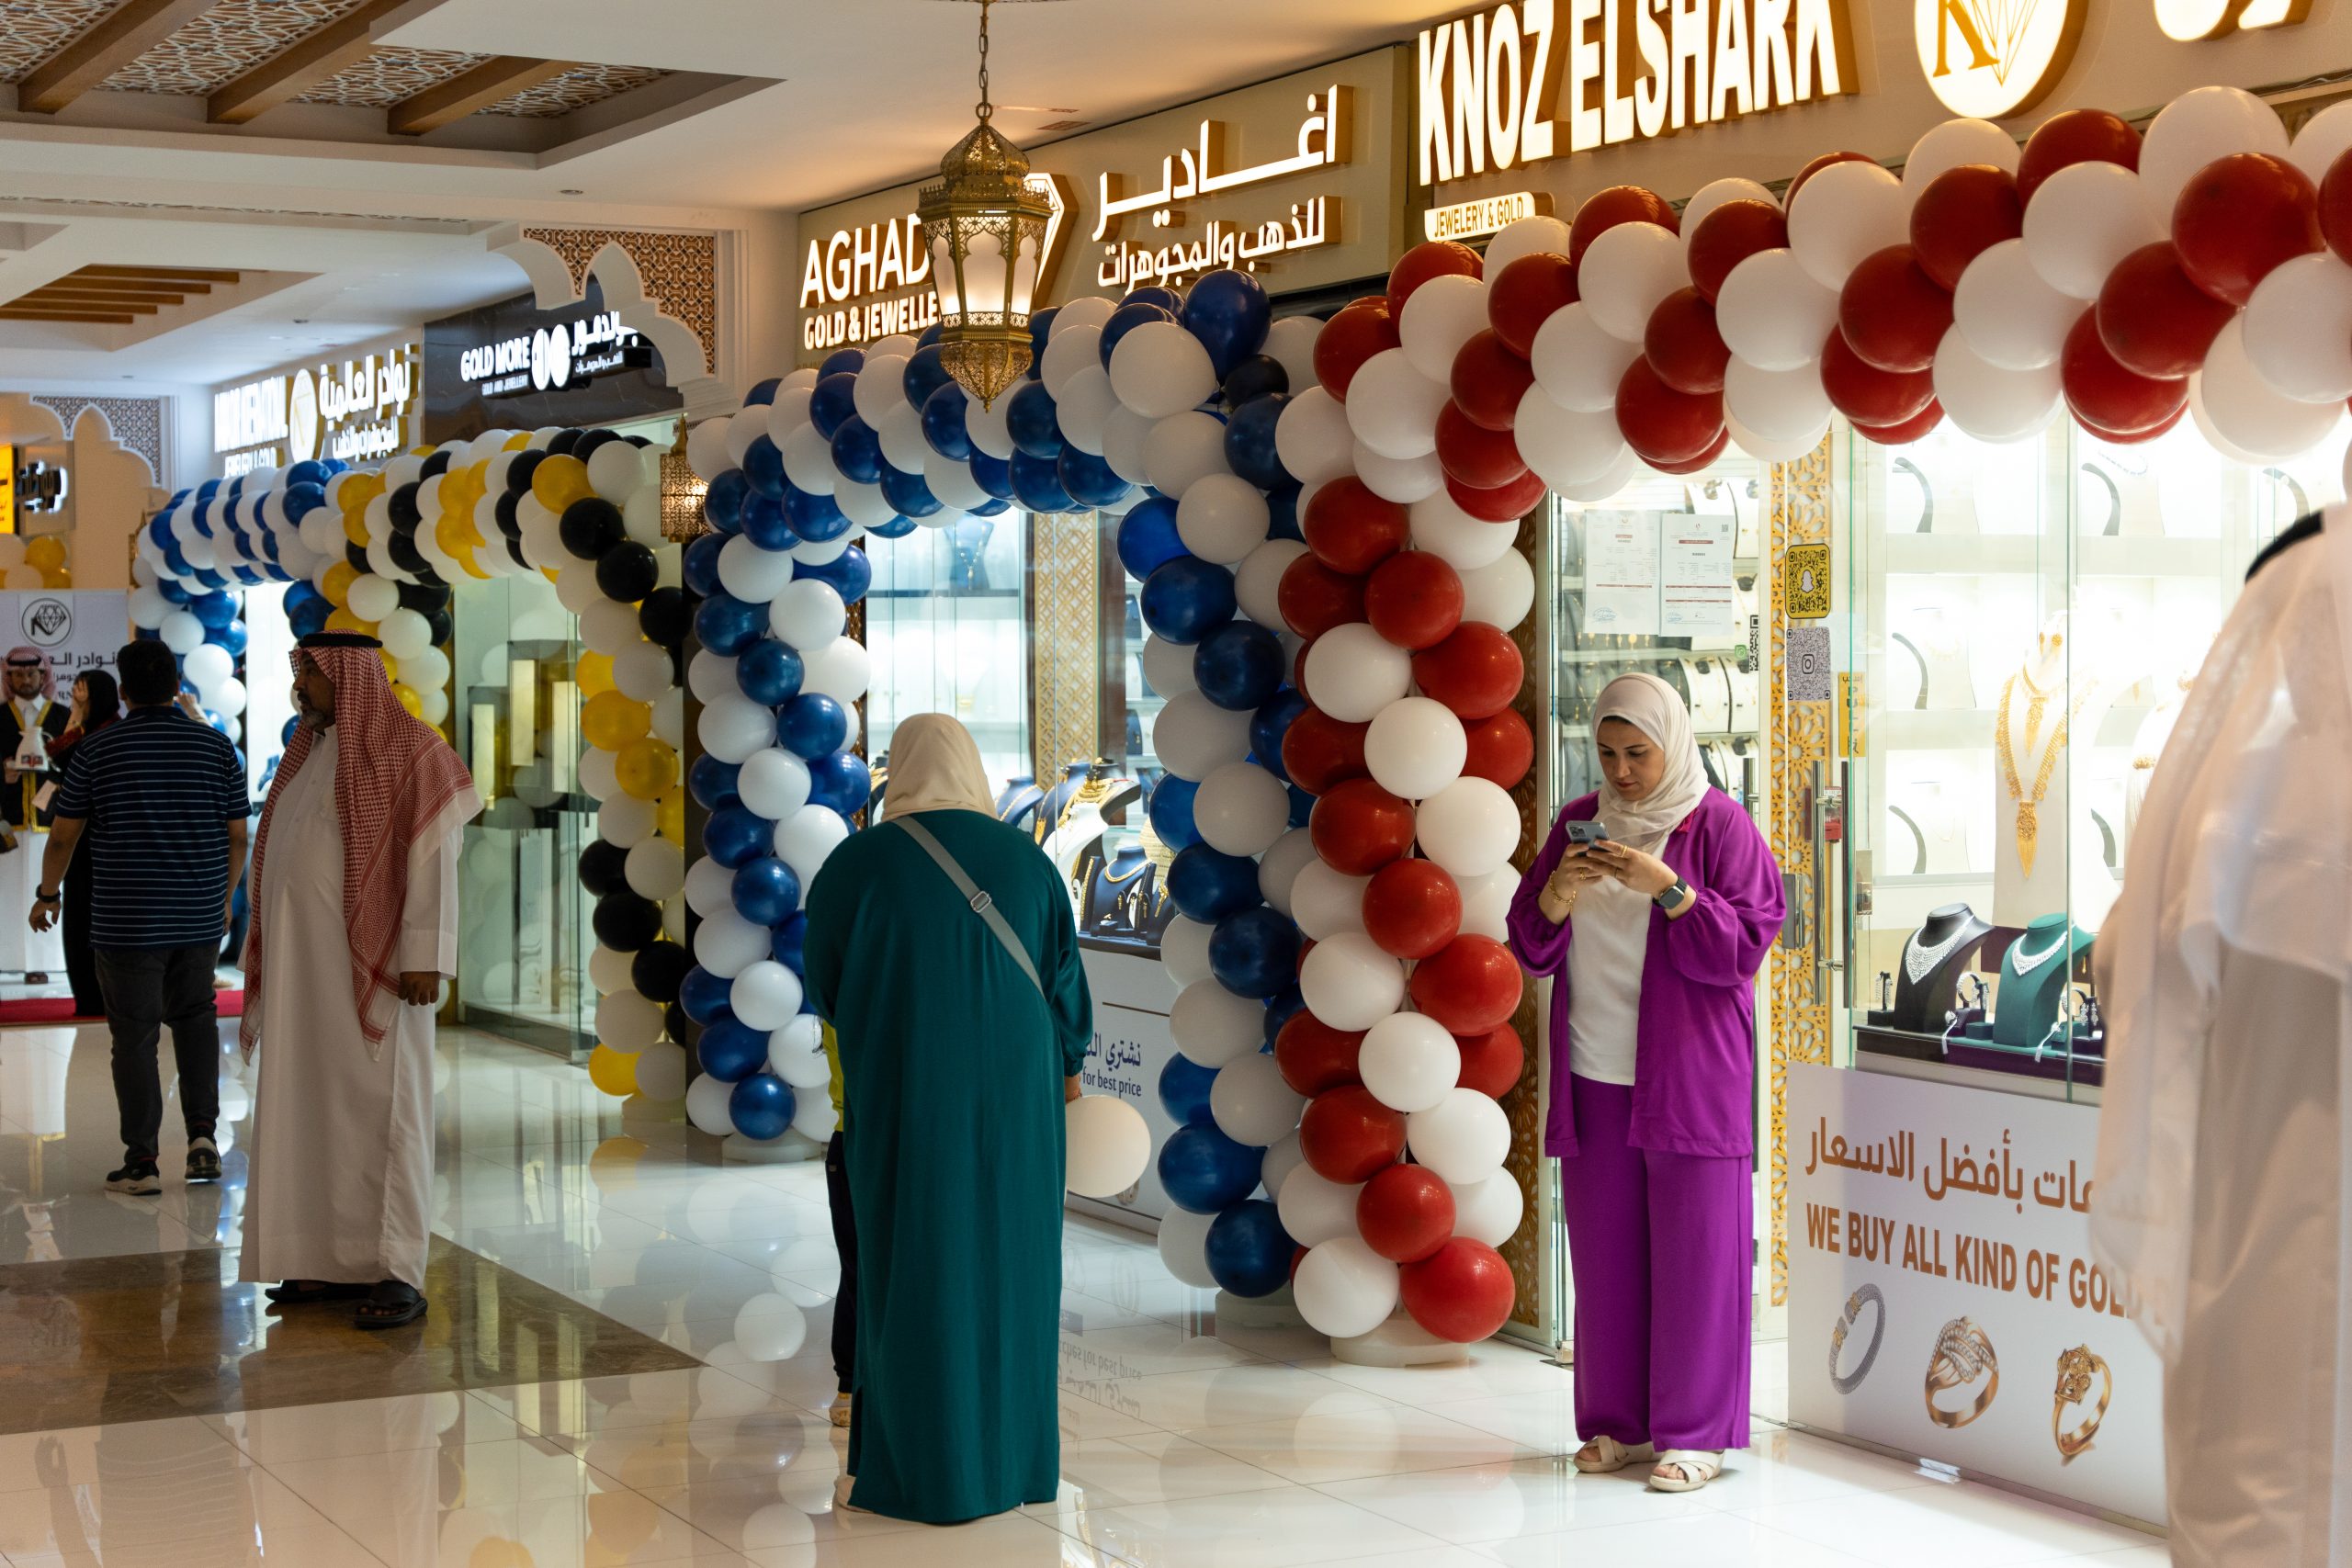 City Center Doha announces the opening of the new “Gold Souq”